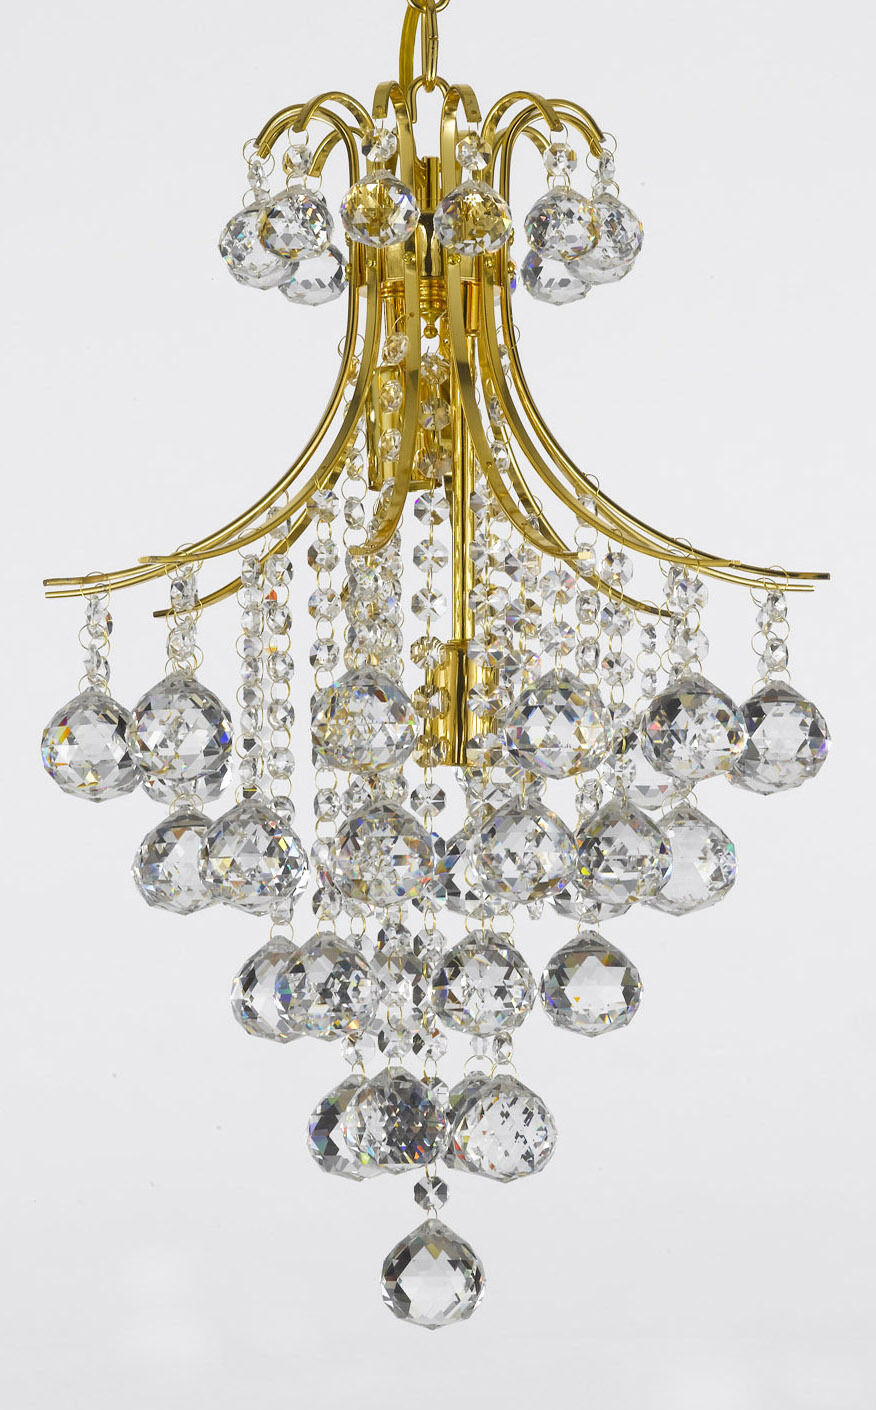 FRENCH EMPIRE CRYSTAL BALL CHANDELIER LIGHTING FIXTURE PENDANT CEILING LAMP GOLD